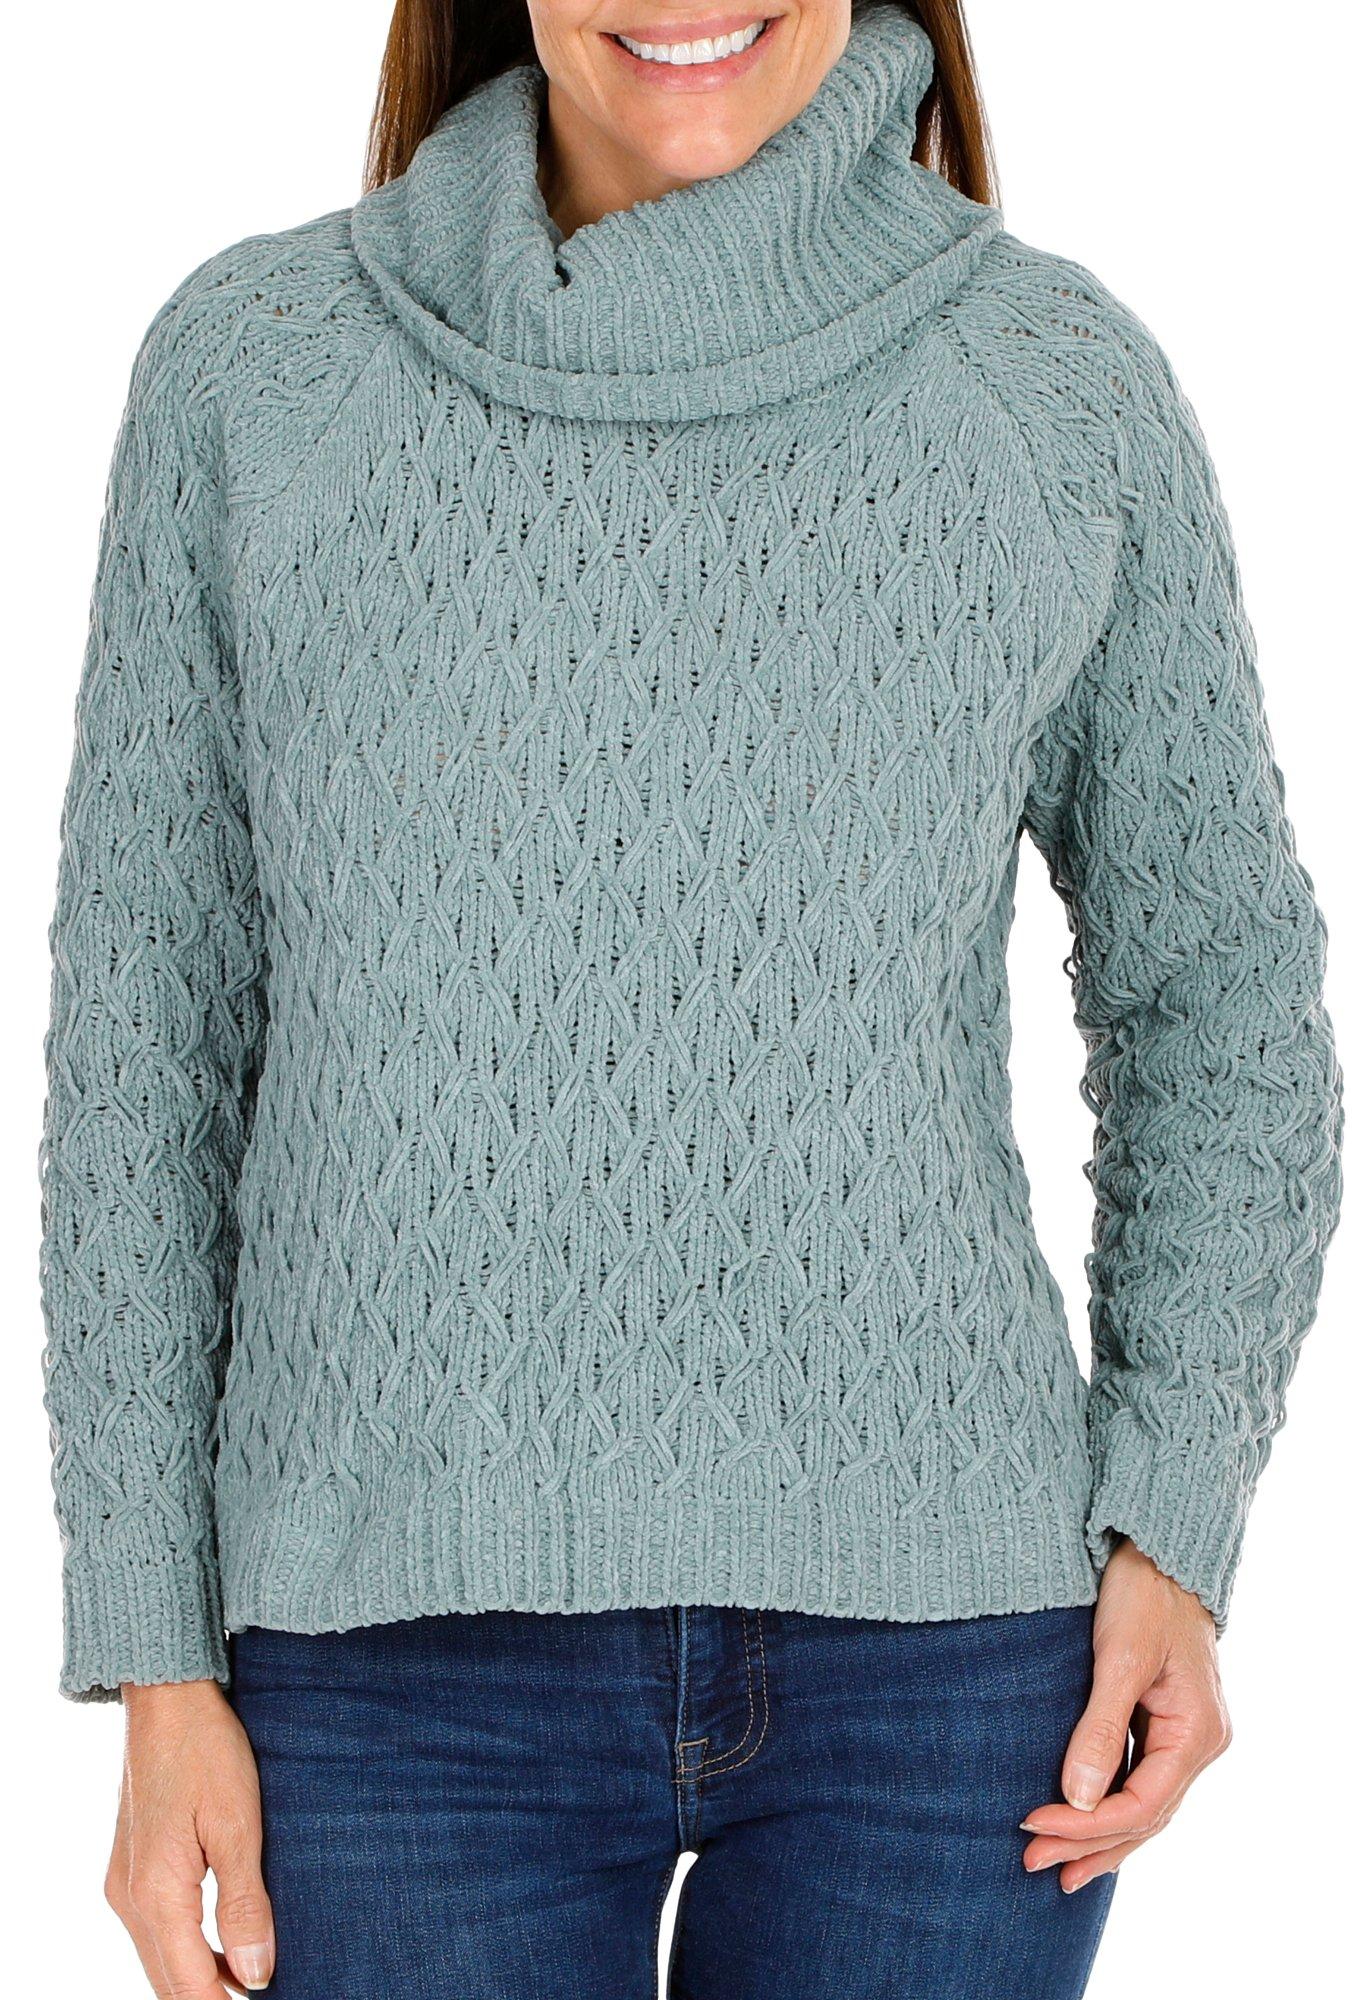 Women's Solid Cable Knit Sweater - Blue